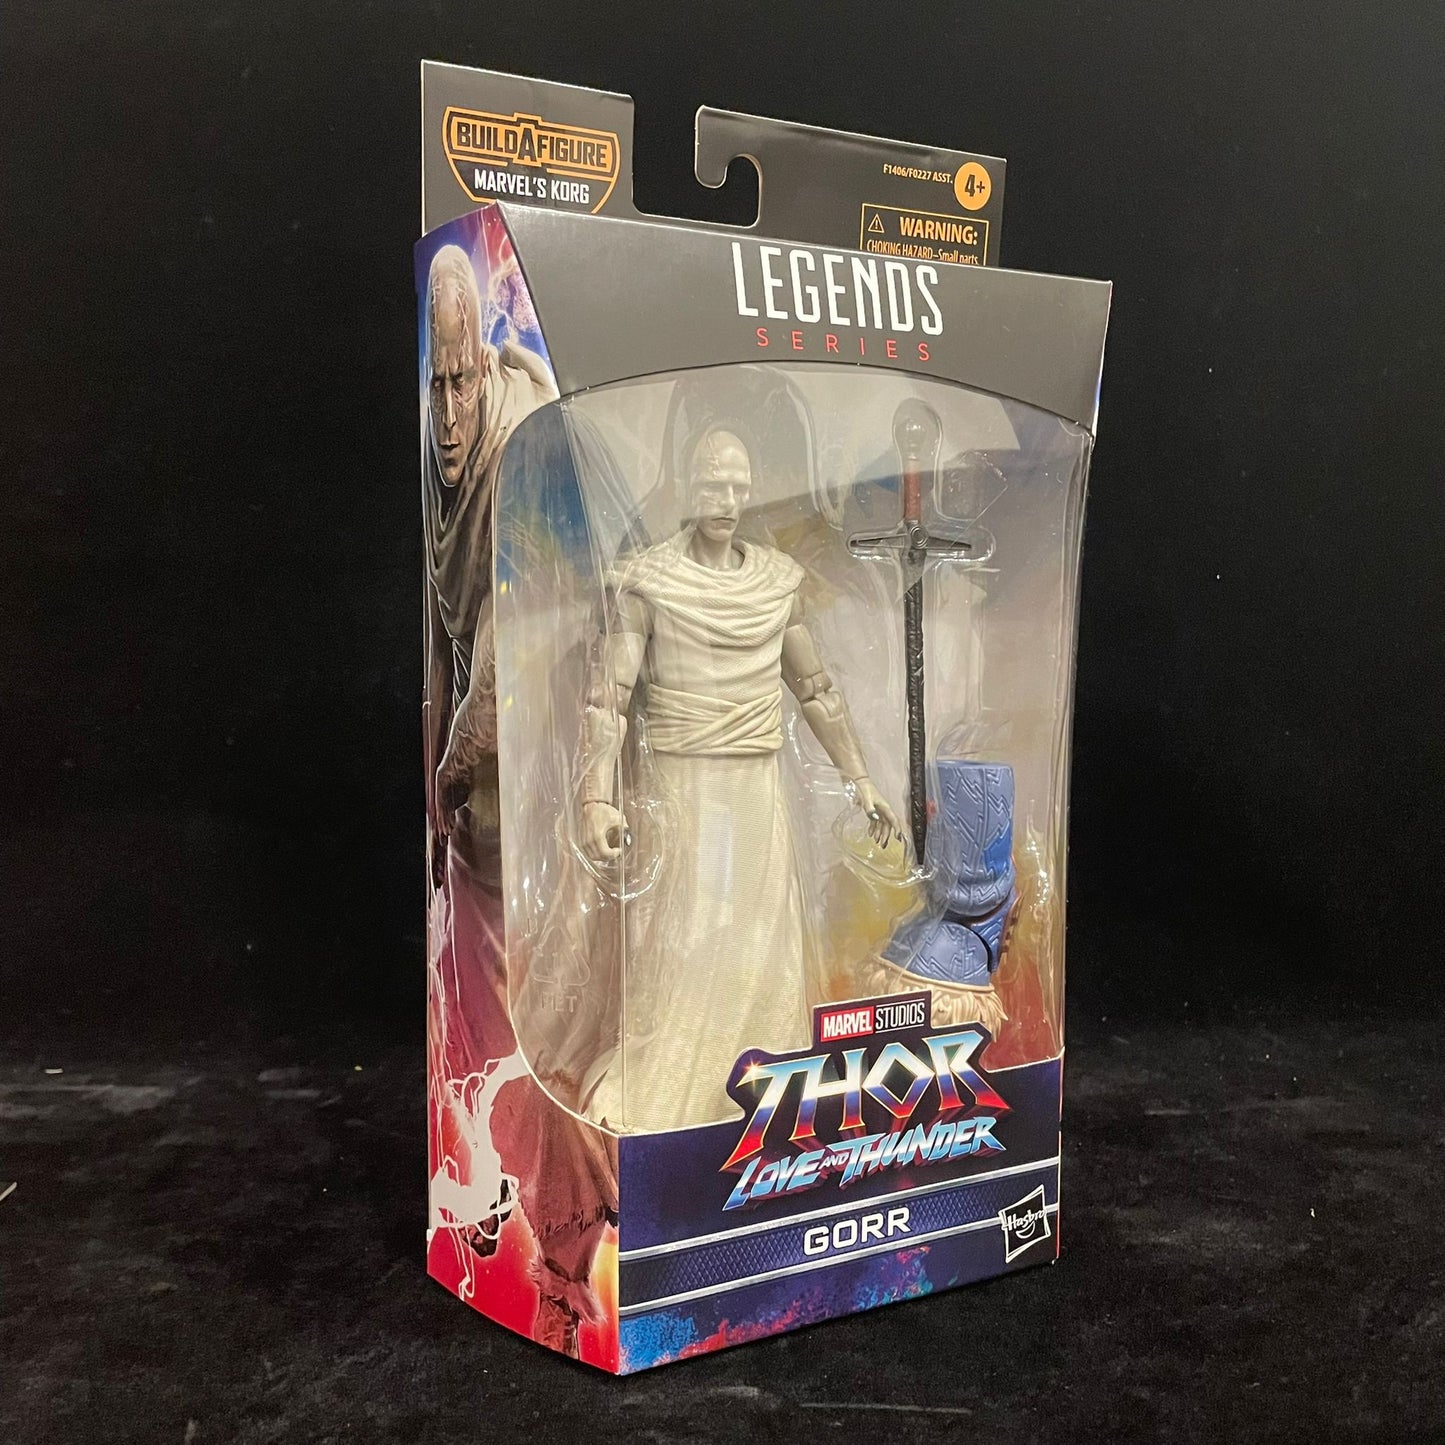 Marvel Legends Series Thor: Love and Thunder Gorr 6-inch Action Figure